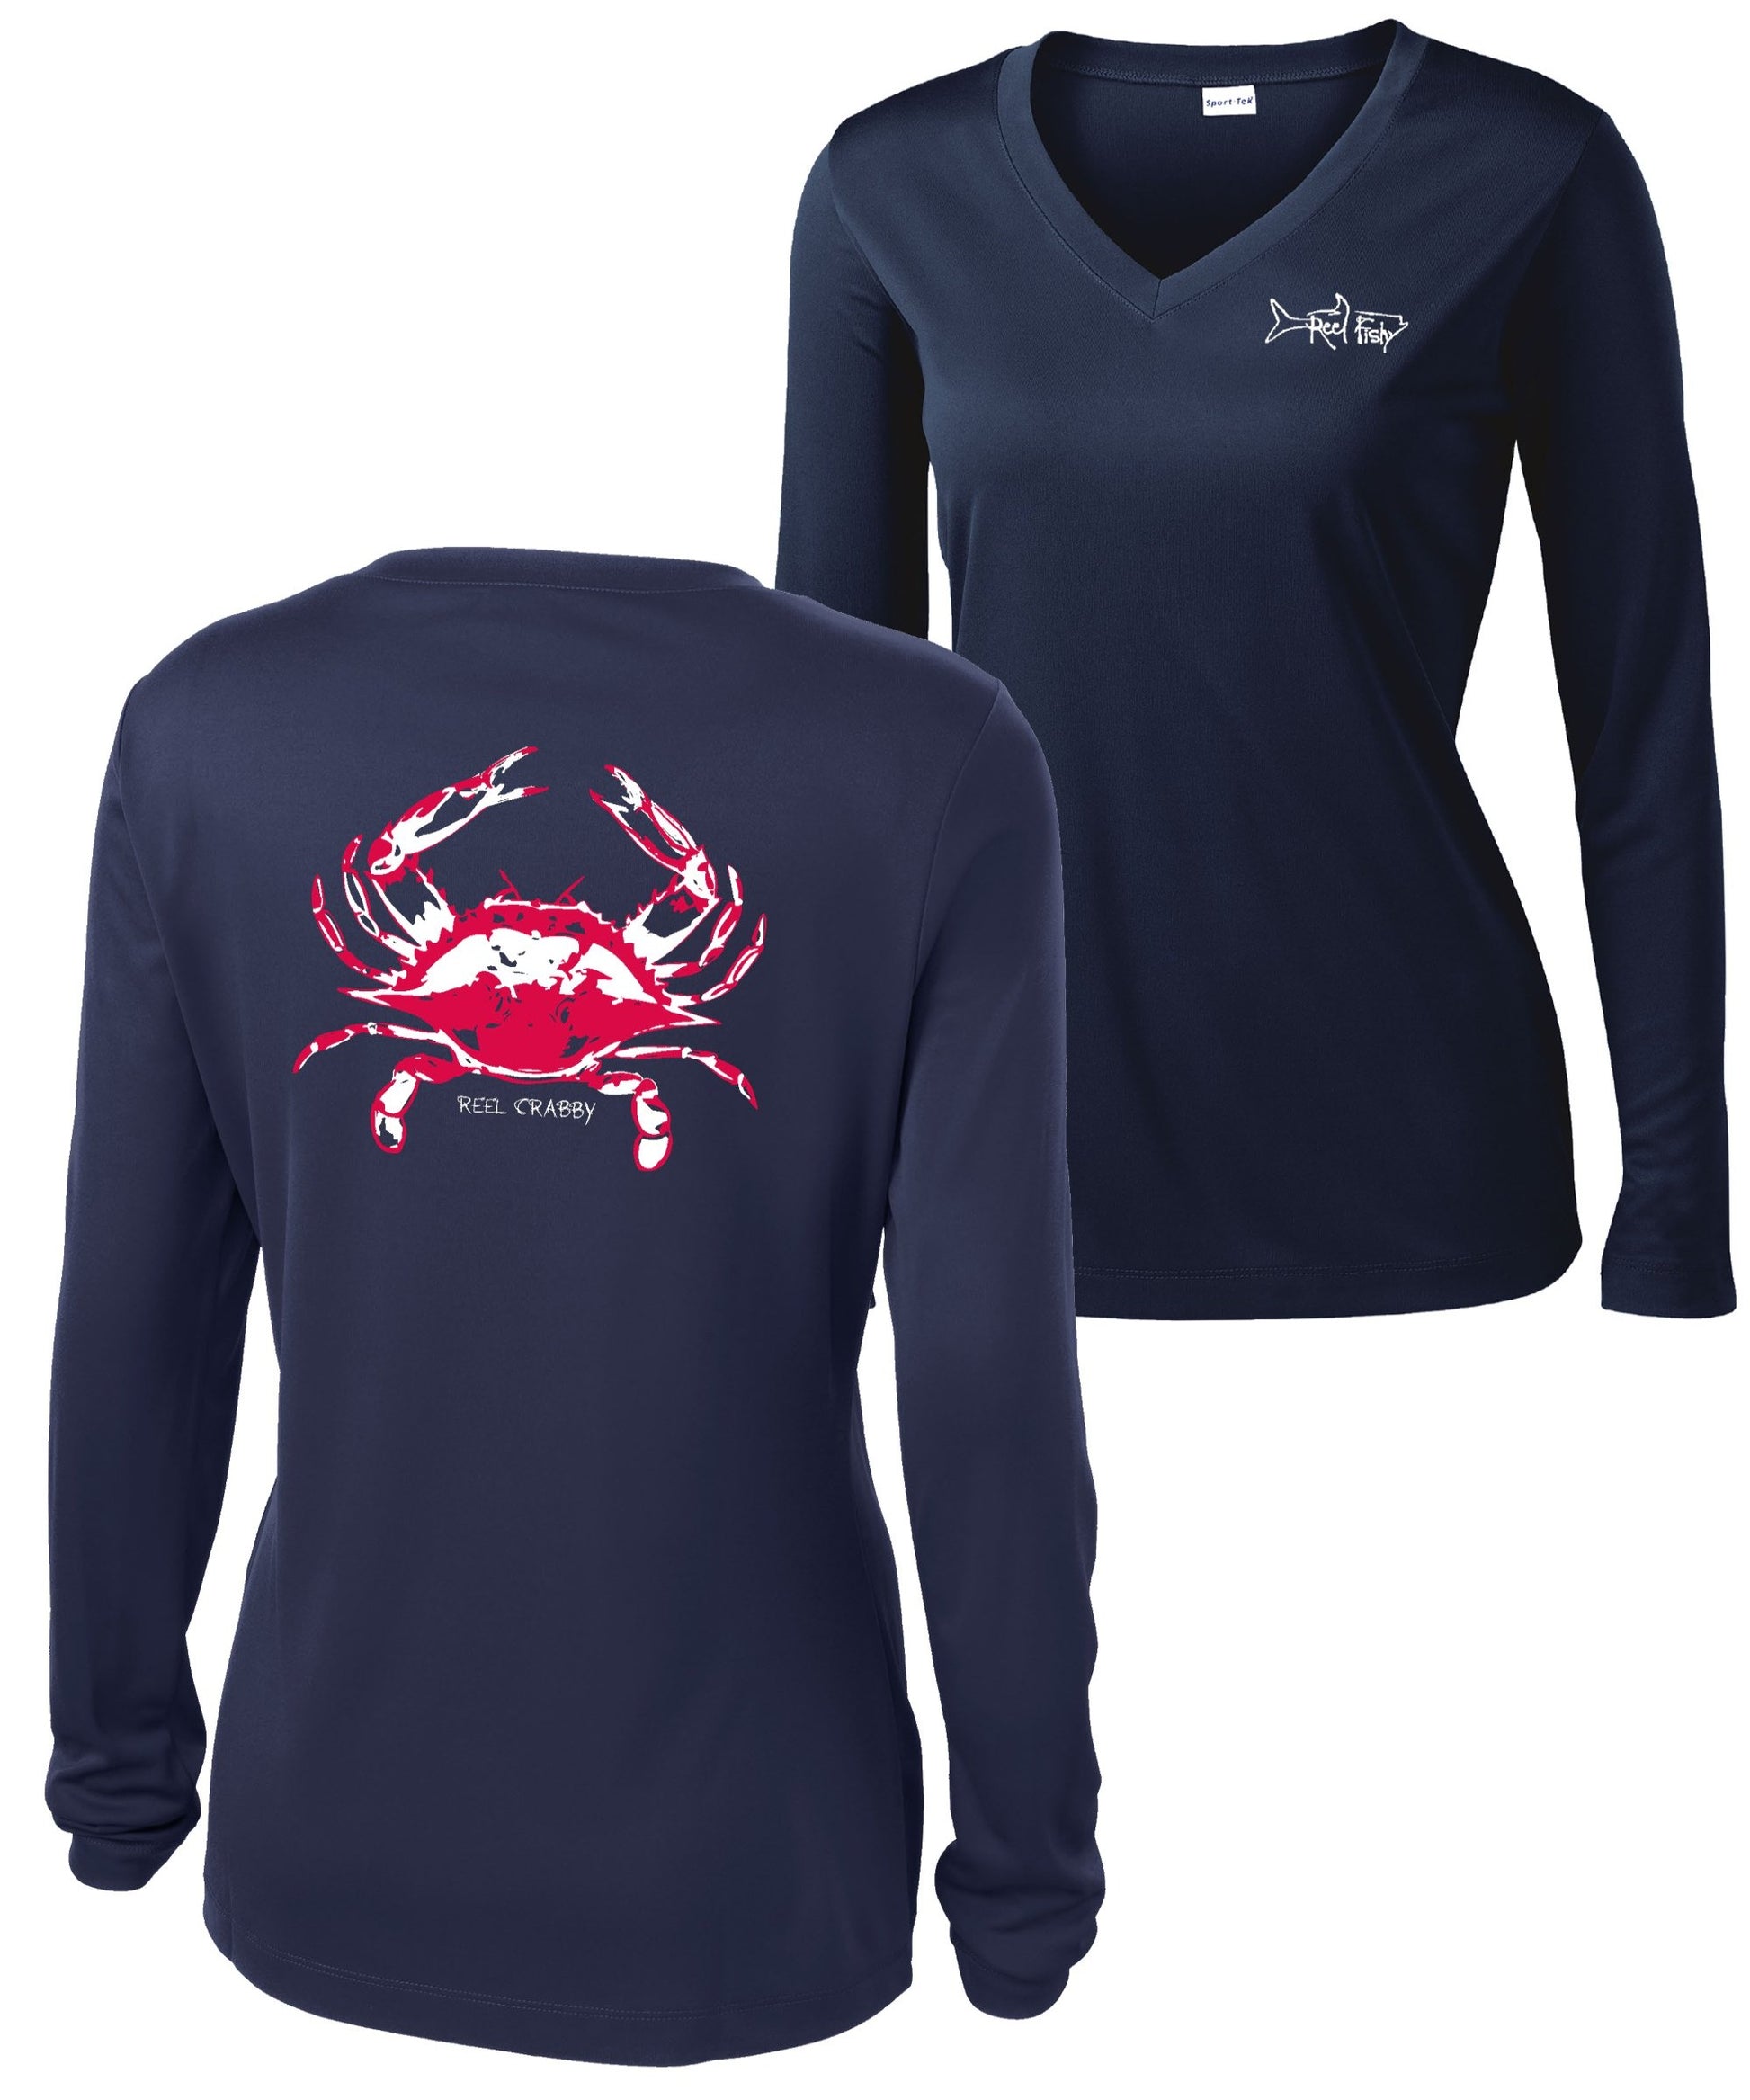 American Blue Crab -Reel Crabby Ladies Performance Dry-fit V-neck Long Sleeve Shirt with 50+ UV Sun Protection in Navy